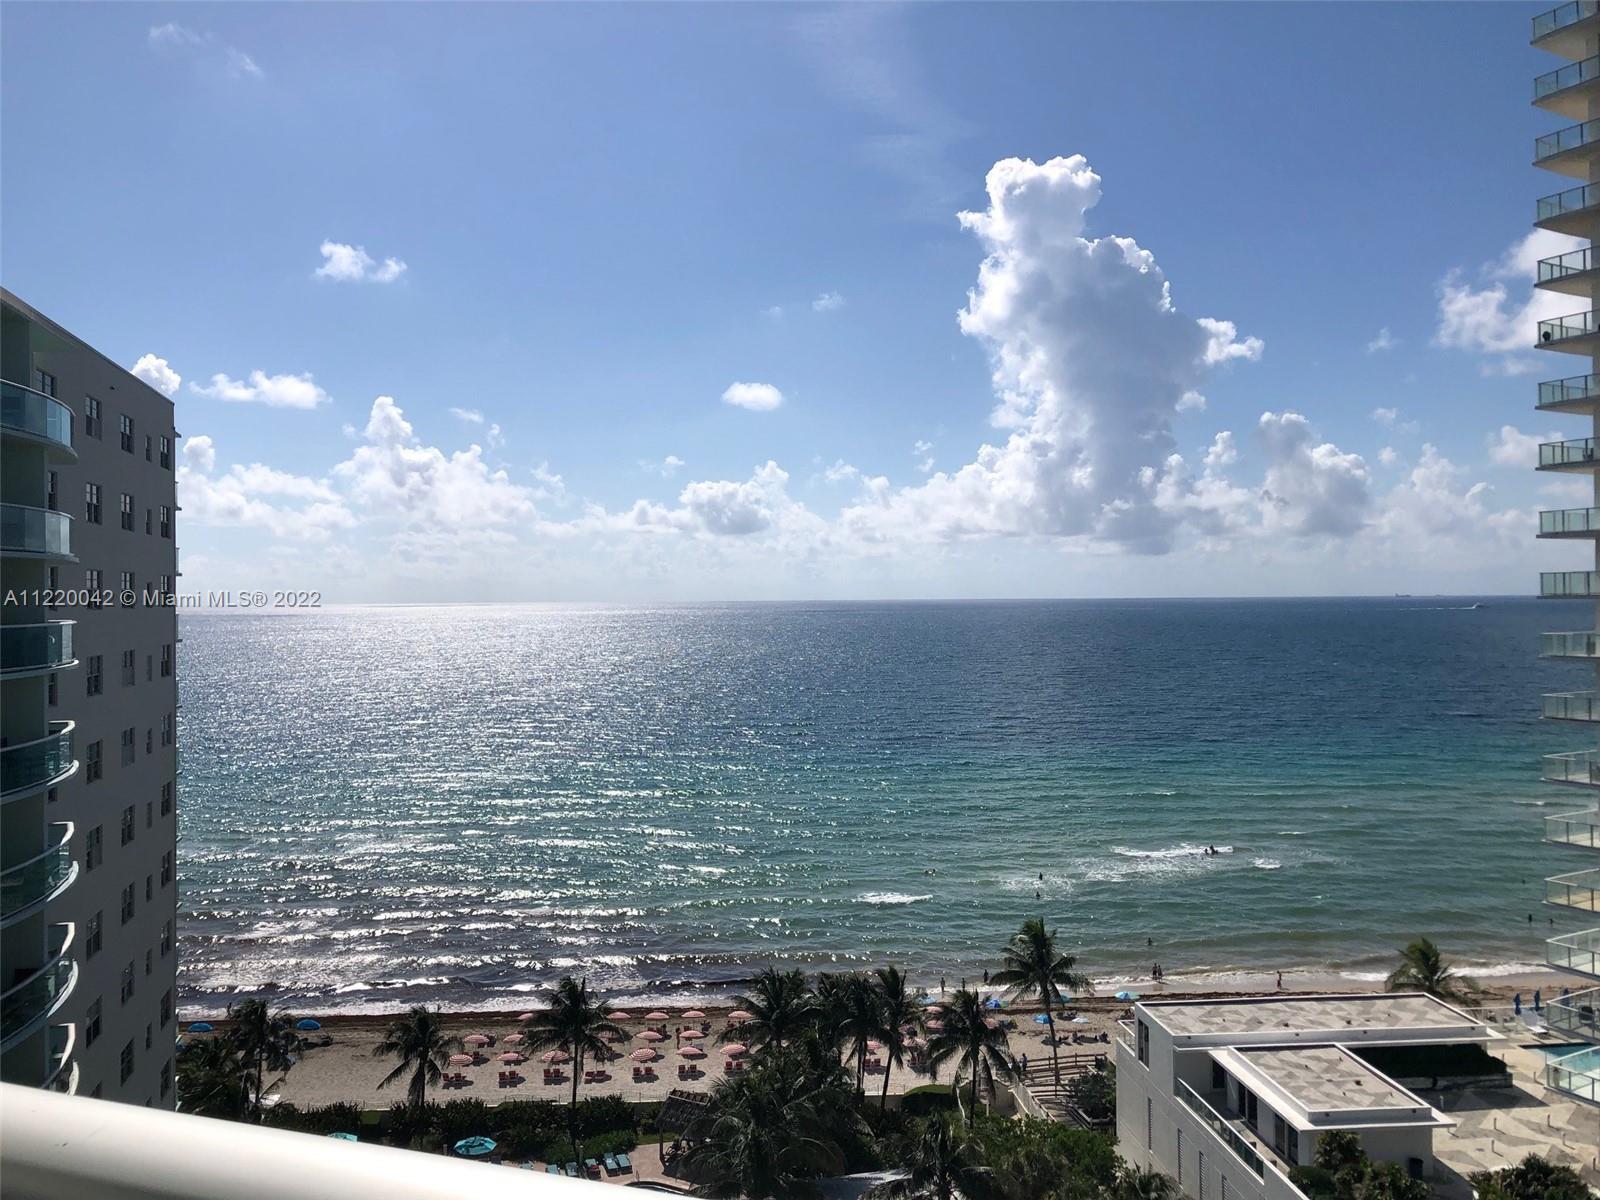 SUPER HOT RESORT LOCATION ON HOLLYWOOD BEACH.1BR/1BA 874SF.14TH FLOOR.THE BEST DIRECT EAST OCEAN & S